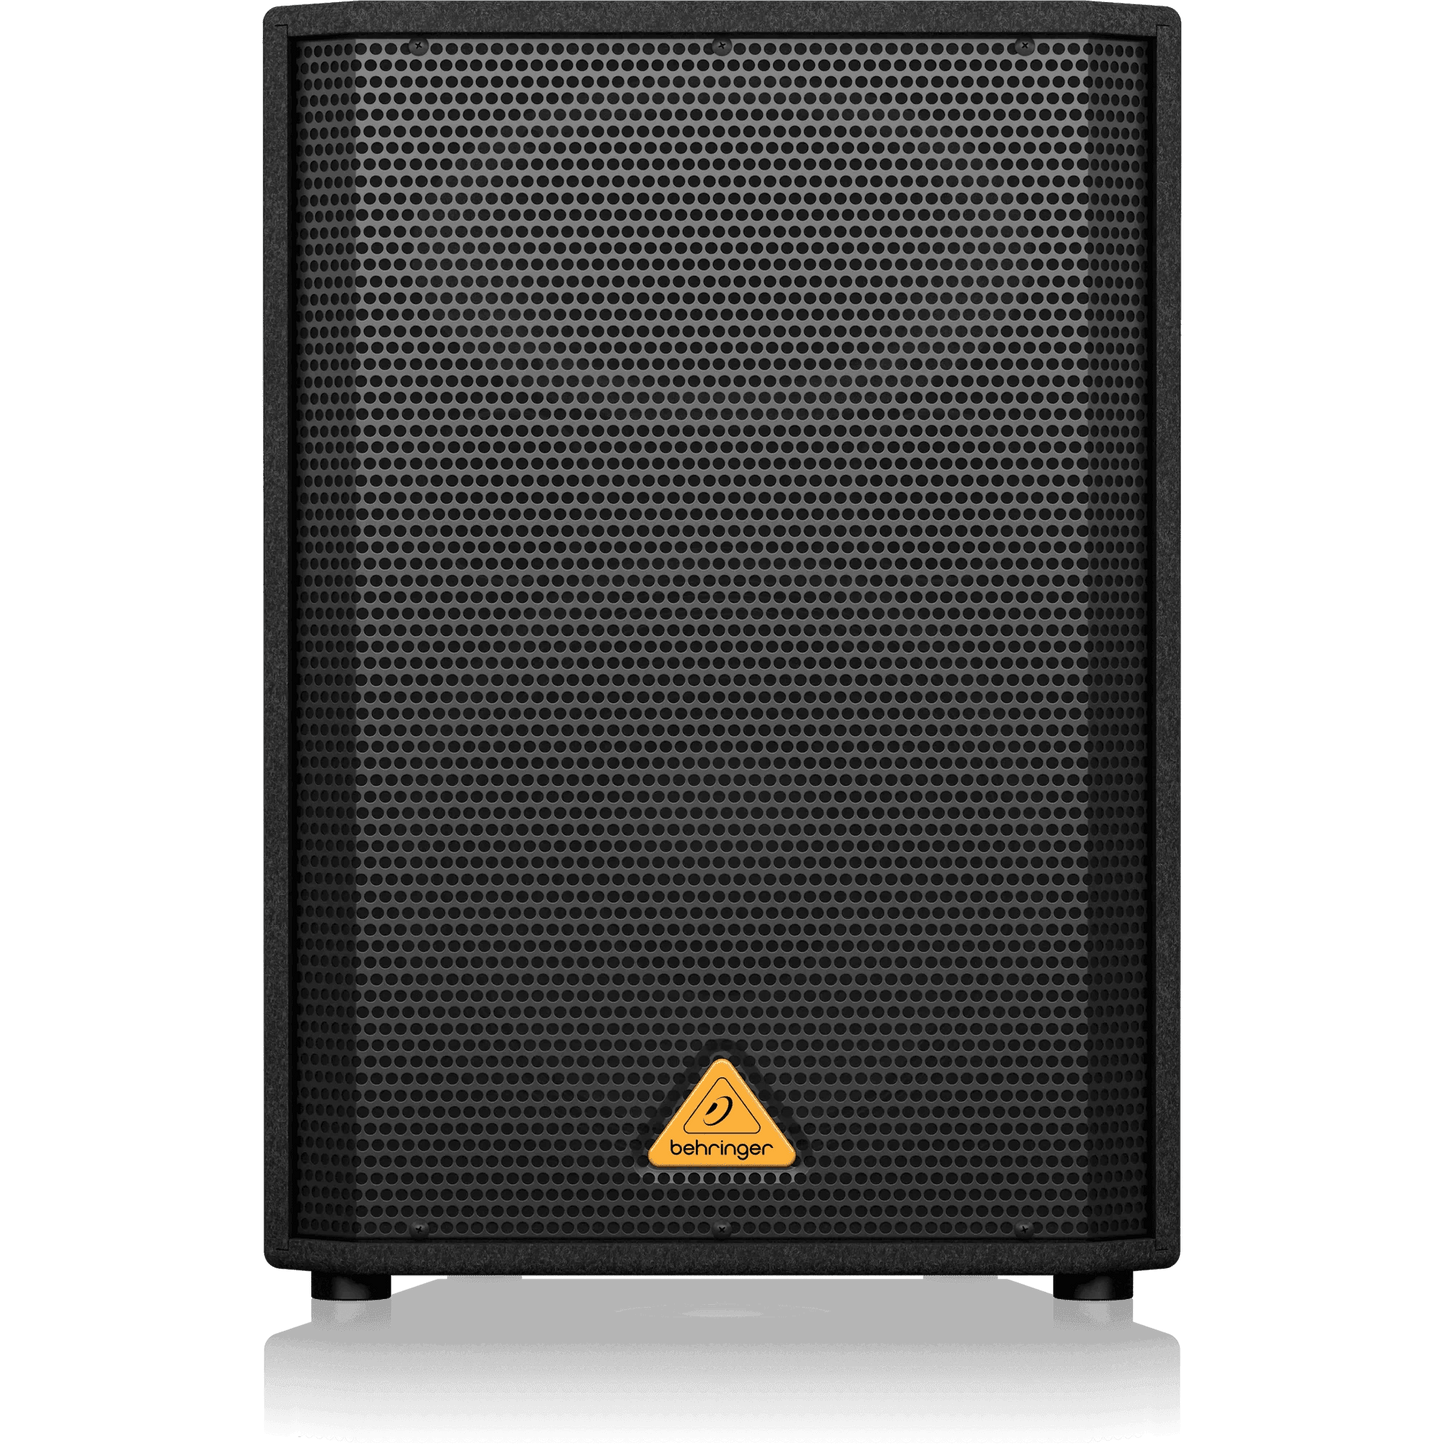 Behringer VP1220 Professional 800W PA Speaker with 12" Woofer and 1.75" Titanium-Diaphragm Compression Driver